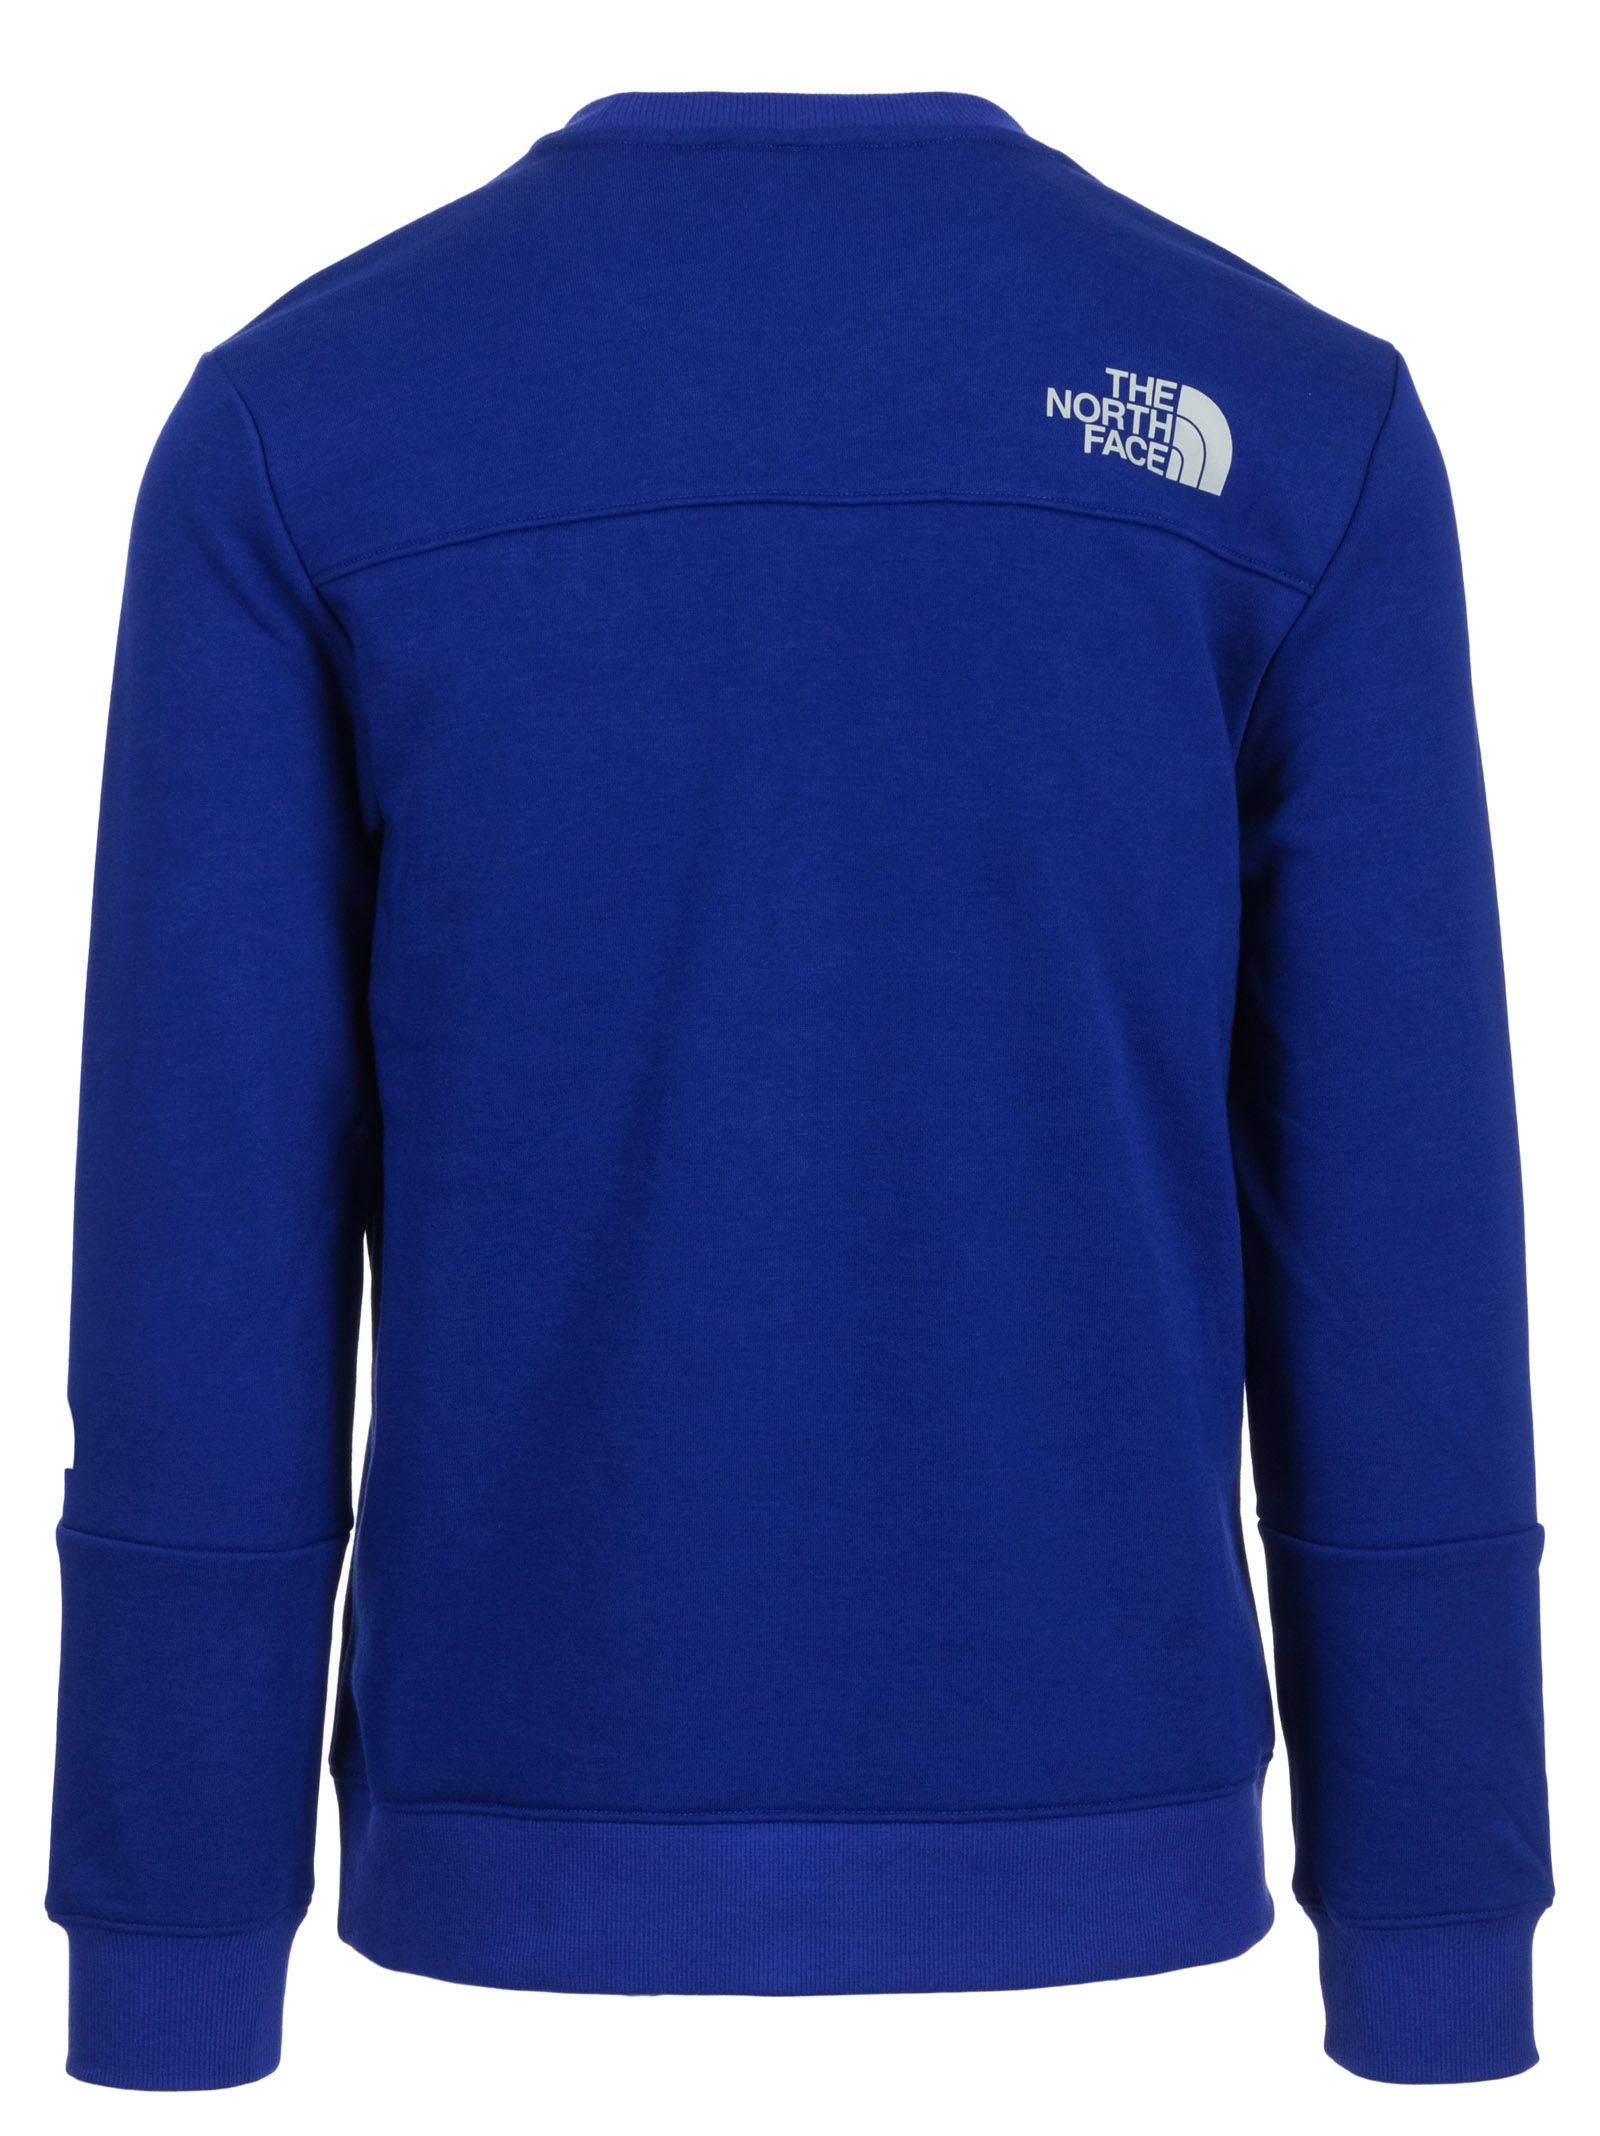 The North Face The North Face Crew-neck Sweatshirt - Lapis-blue